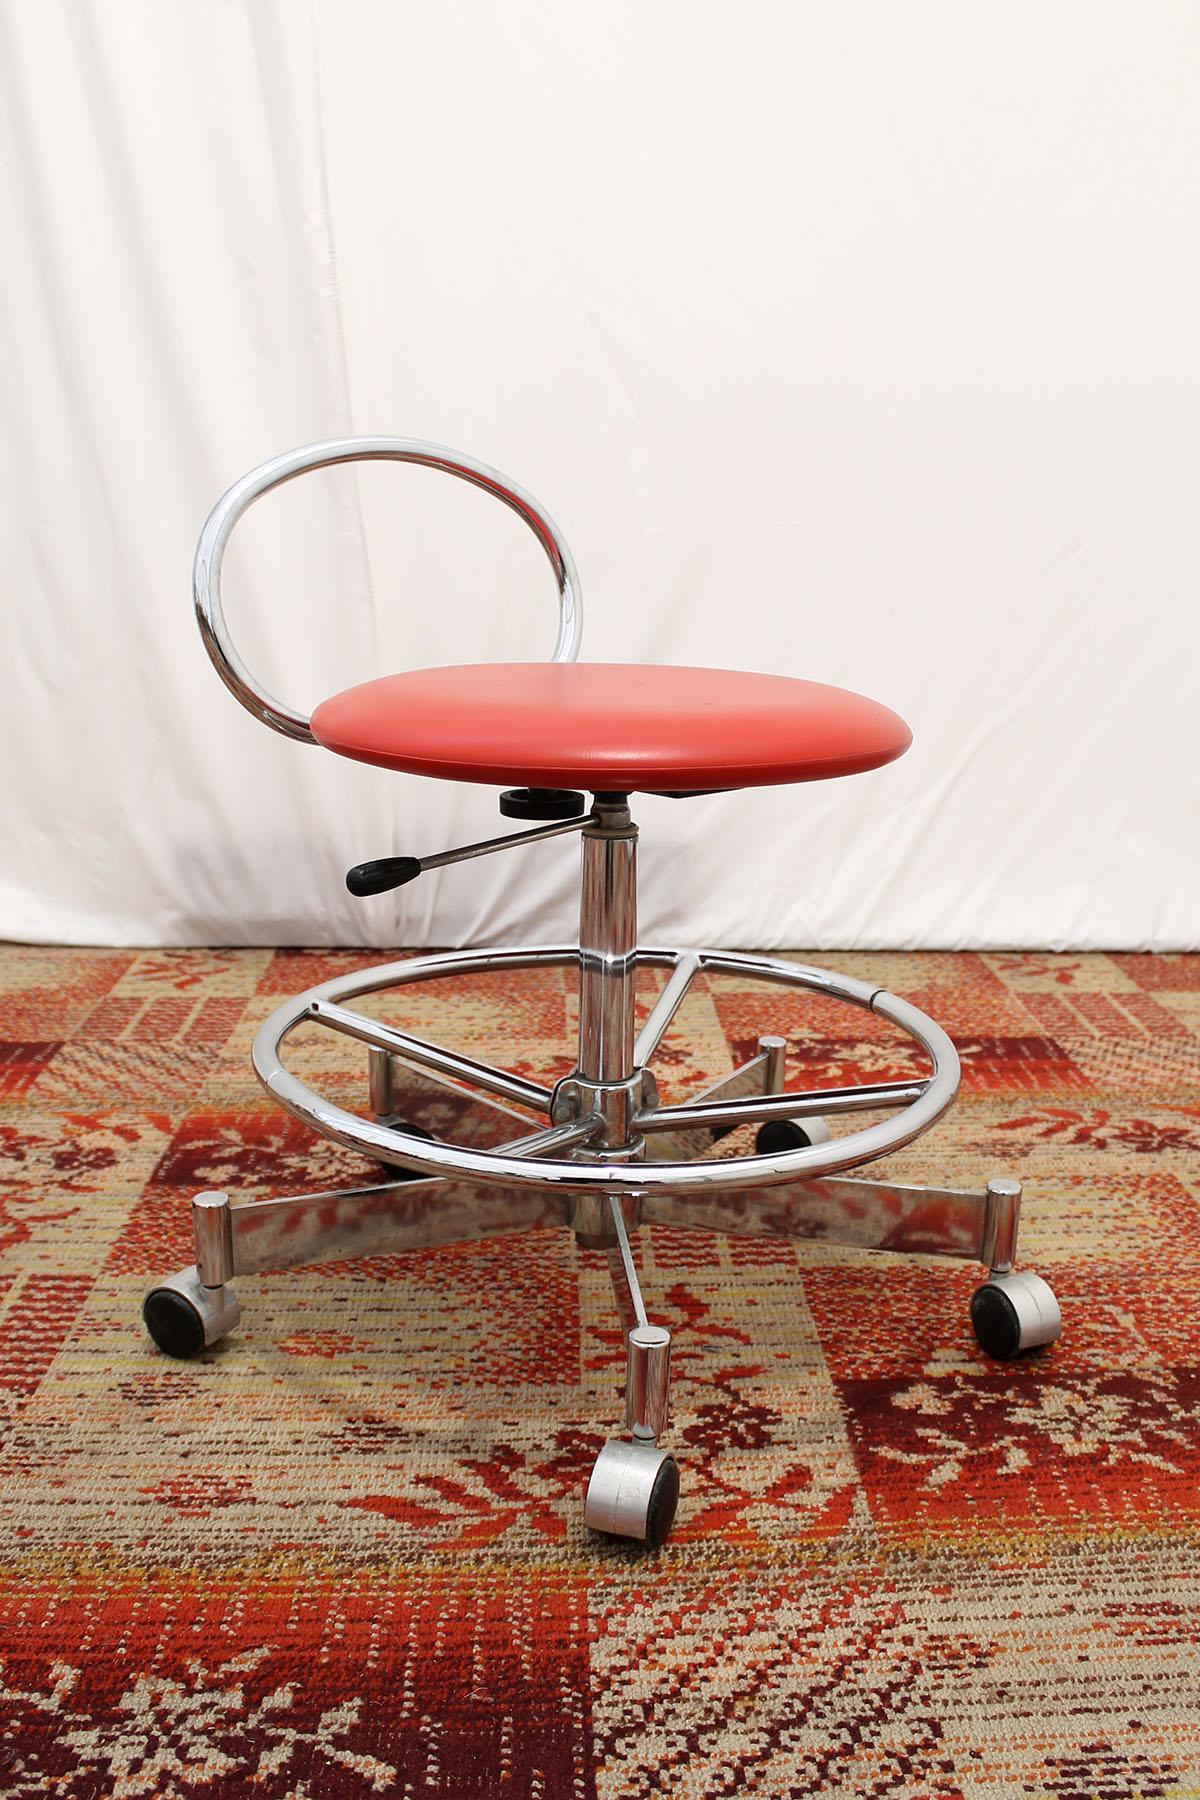 This vintage swivel chair or stool was made by Kovona company in the 1980s. Fully functional, adjustable, rotatable. It's made of chrome and leatherette. In almost excellent condition, like a new one. 


Measures: Height: 62 cm width: 57 cm